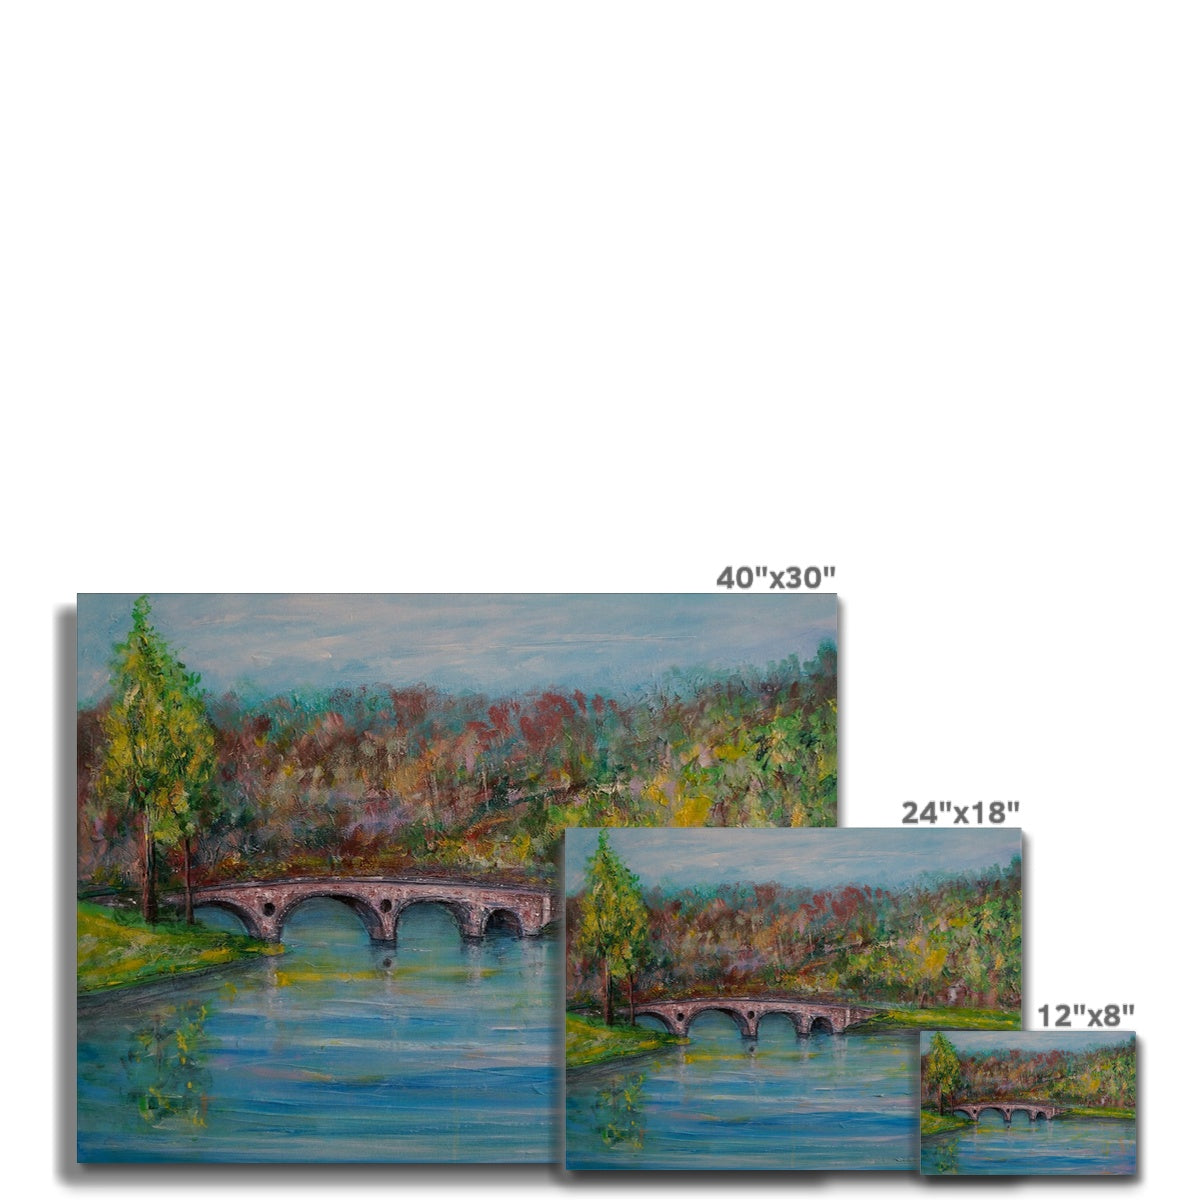 Kenmore Bridge Painting | Canvas From Scotland-Contemporary Stretched Canvas Prints-Scottish Highlands & Lowlands Art Gallery-Paintings, Prints, Homeware, Art Gifts From Scotland By Scottish Artist Kevin Hunter